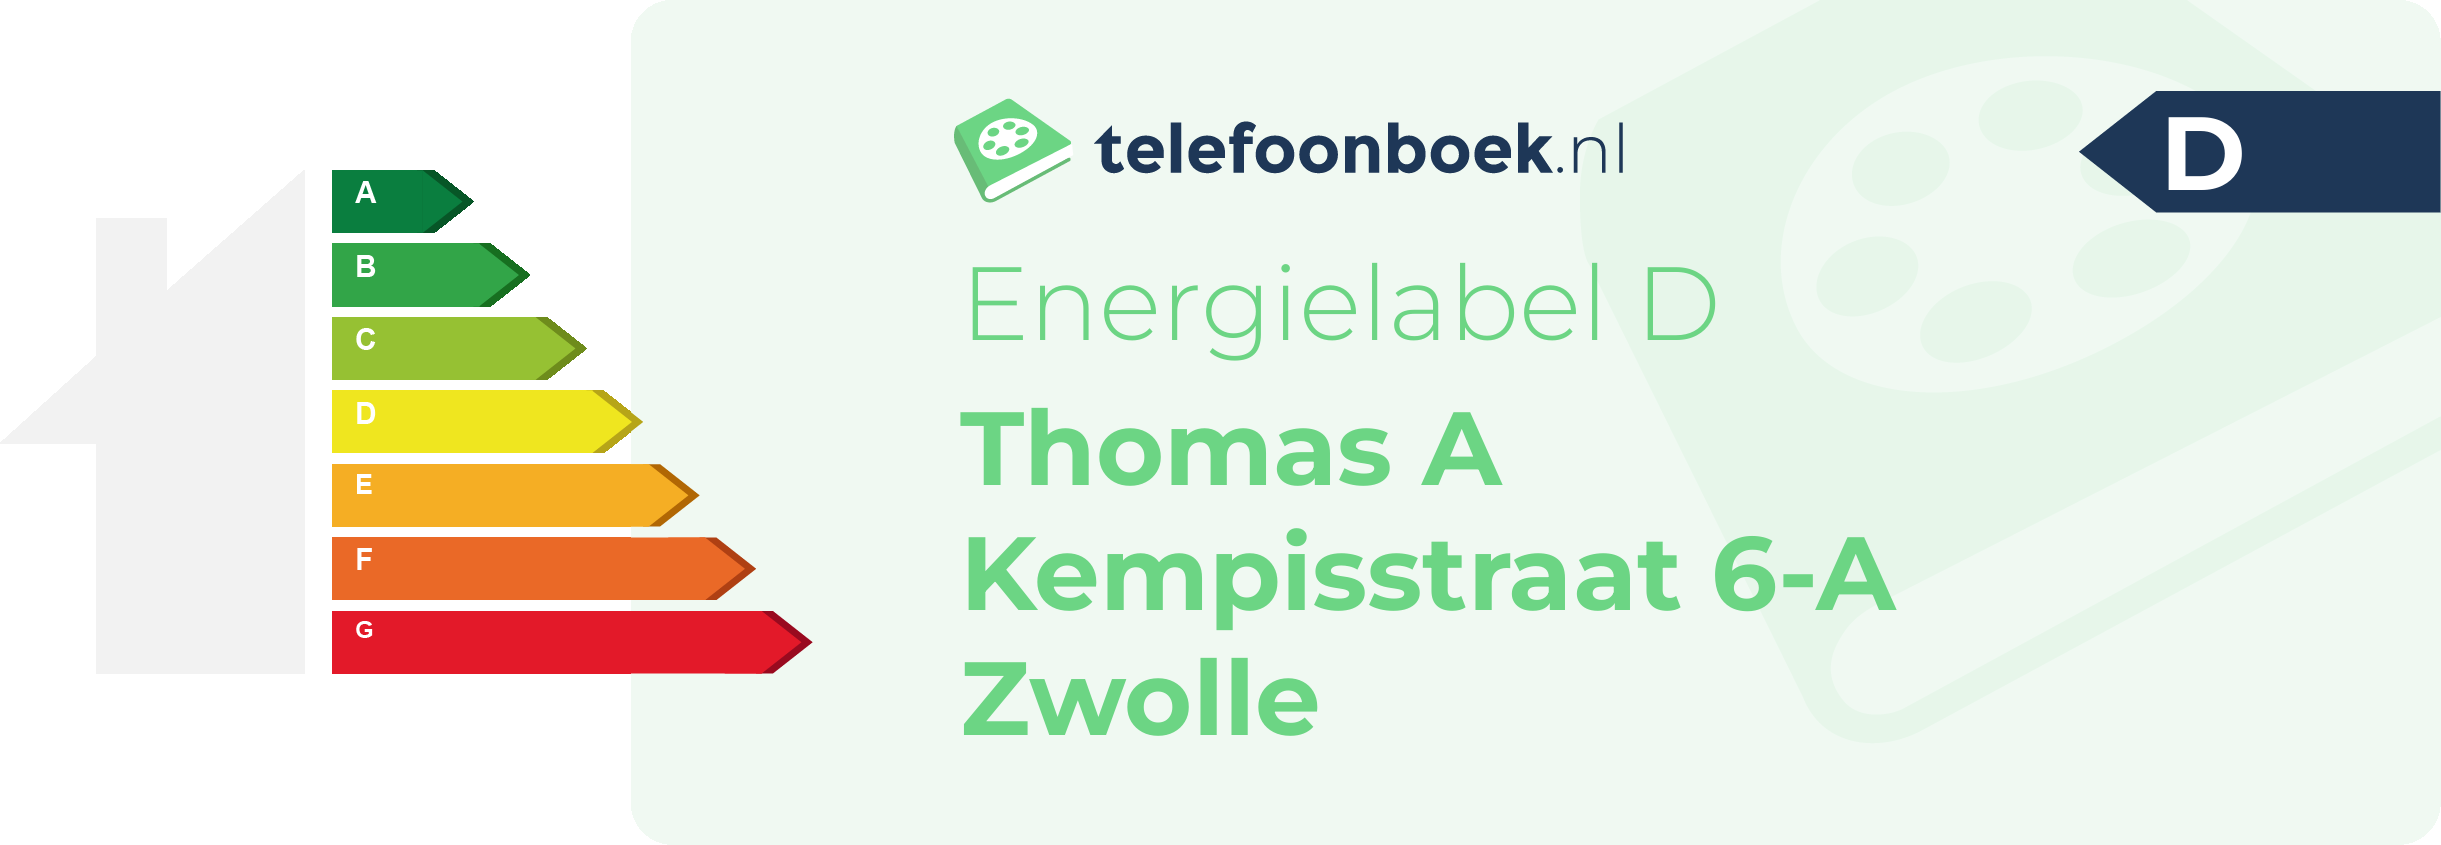 Energielabel Thomas A Kempisstraat 6-A Zwolle